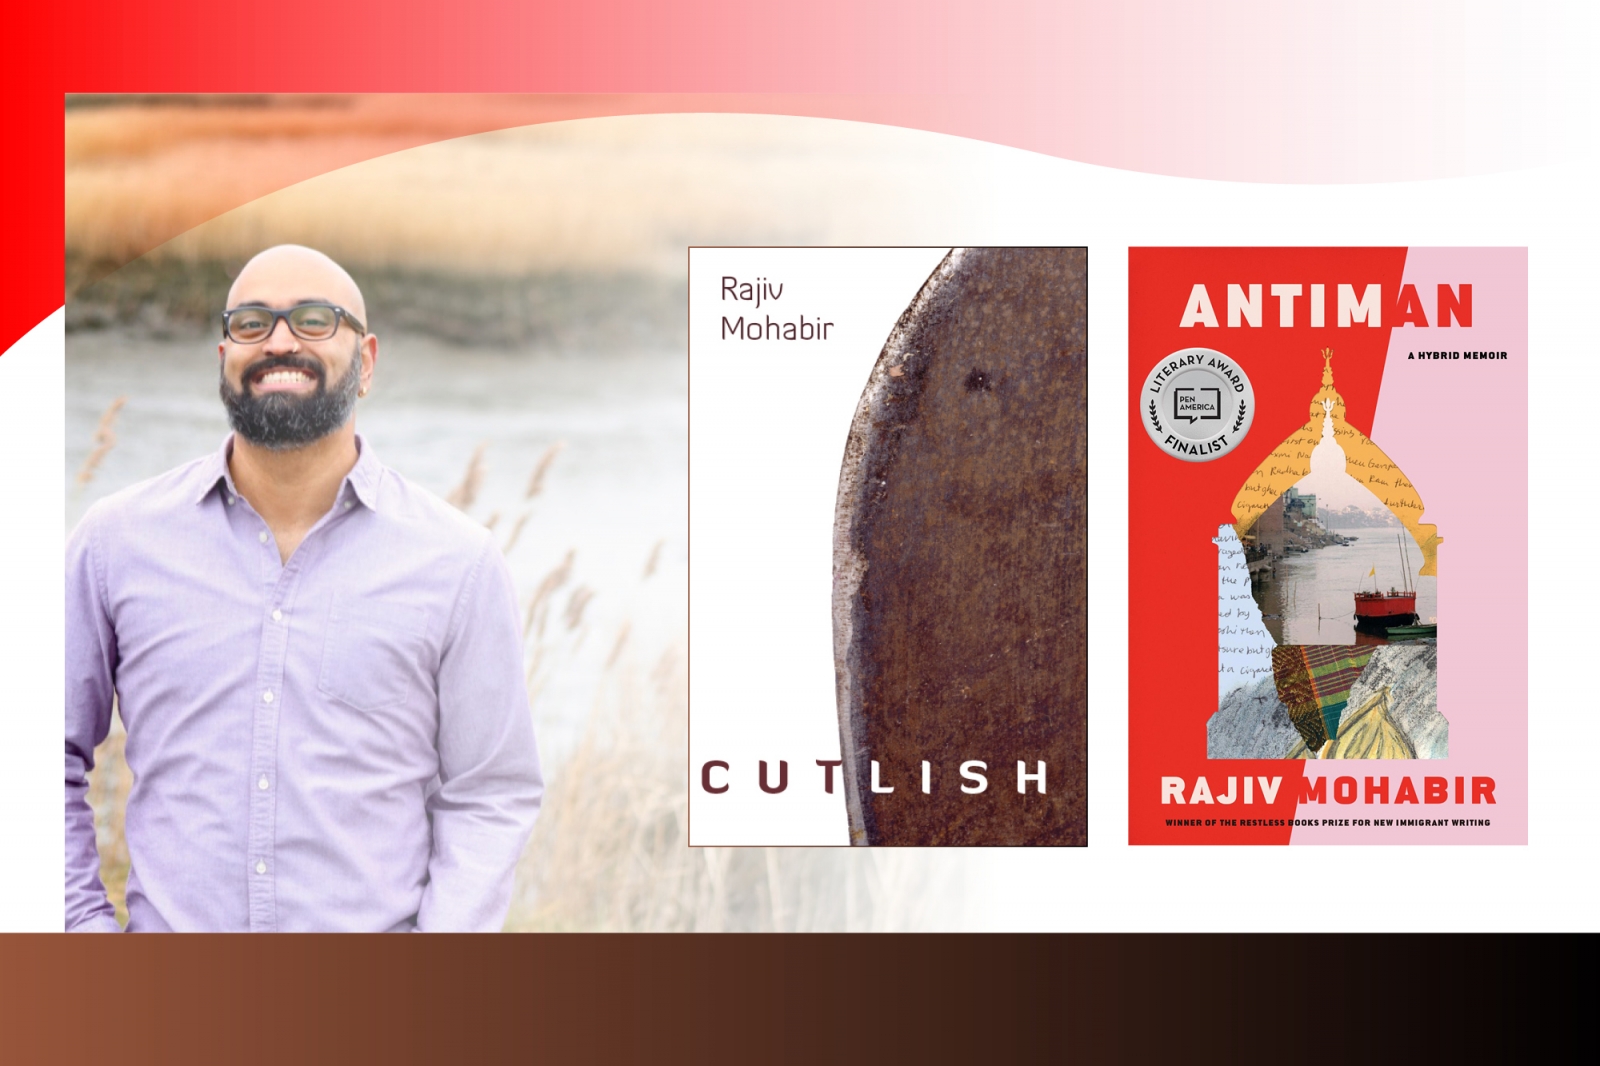 A photograph of Rajiv Mohabir juxtaposed with the covers of two of his books, Cultish and Antiman